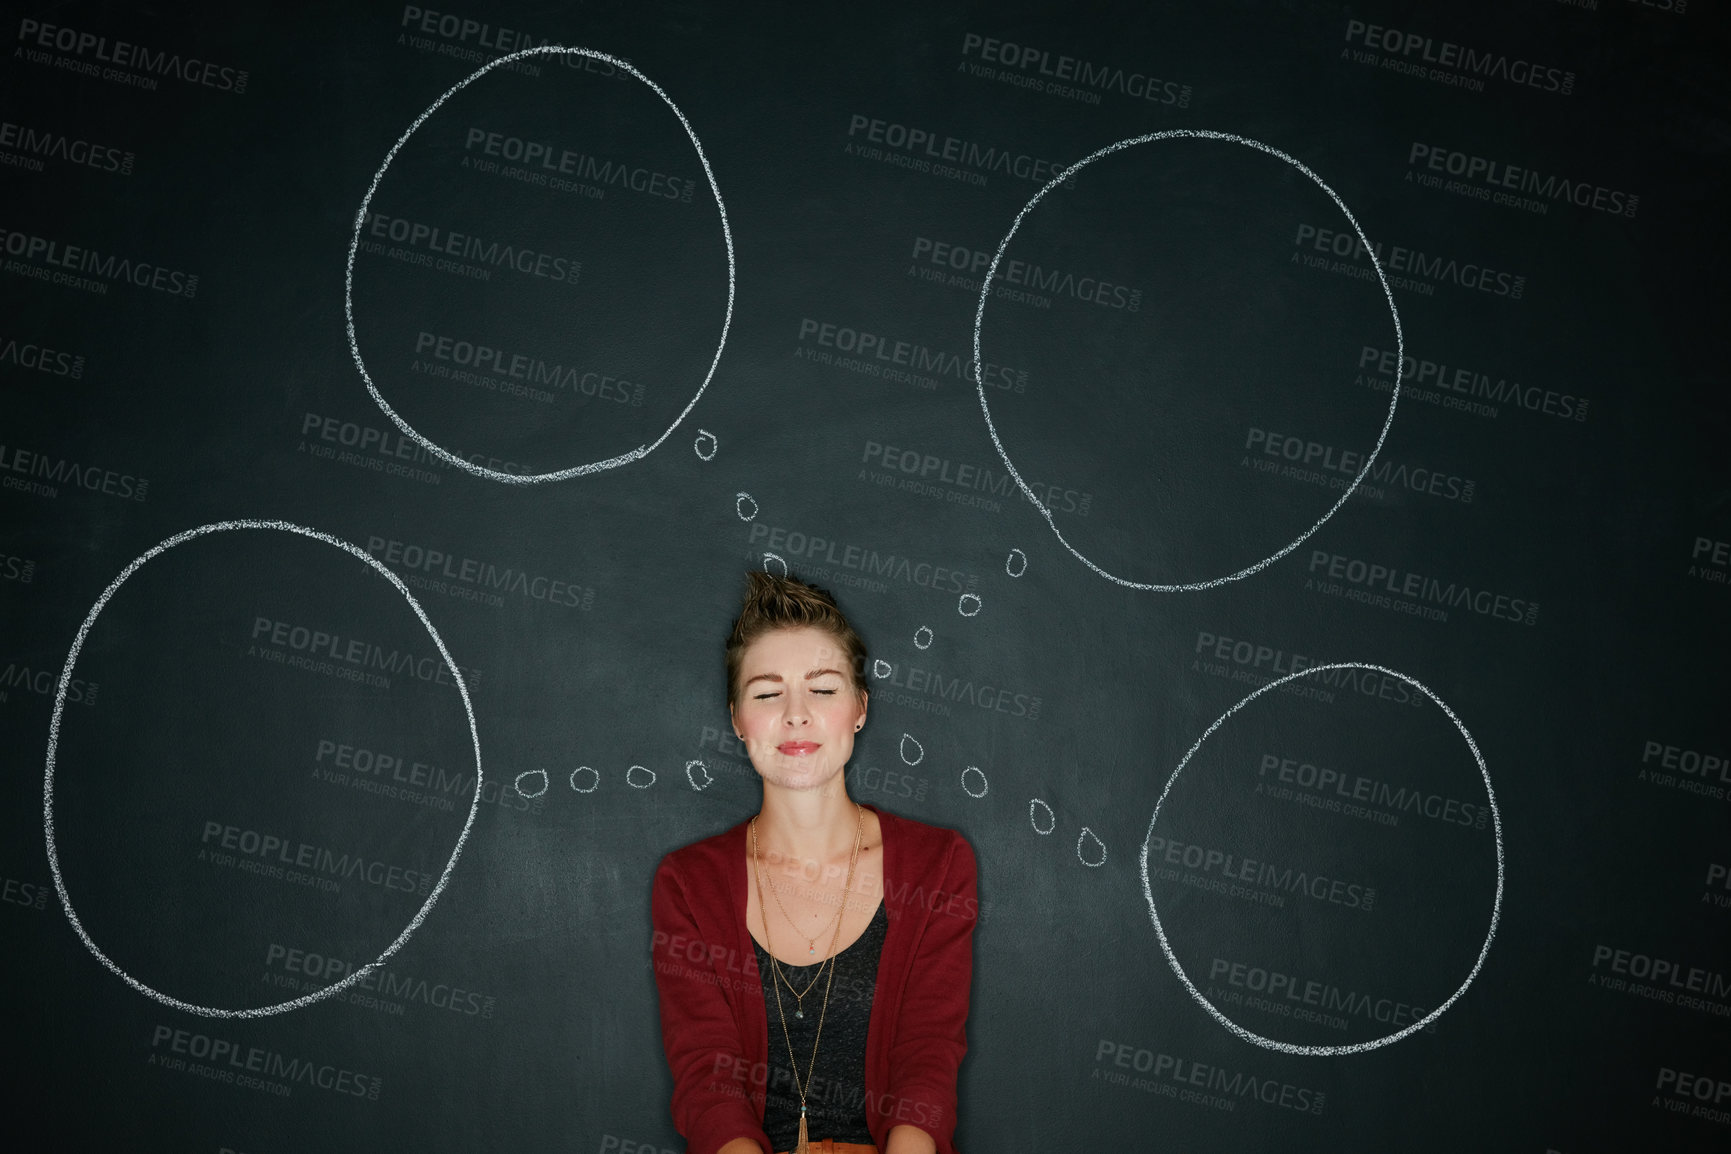 Buy stock photo Studio shot of a young woman posing with a chalk illustration of thought bubbles against a dark background